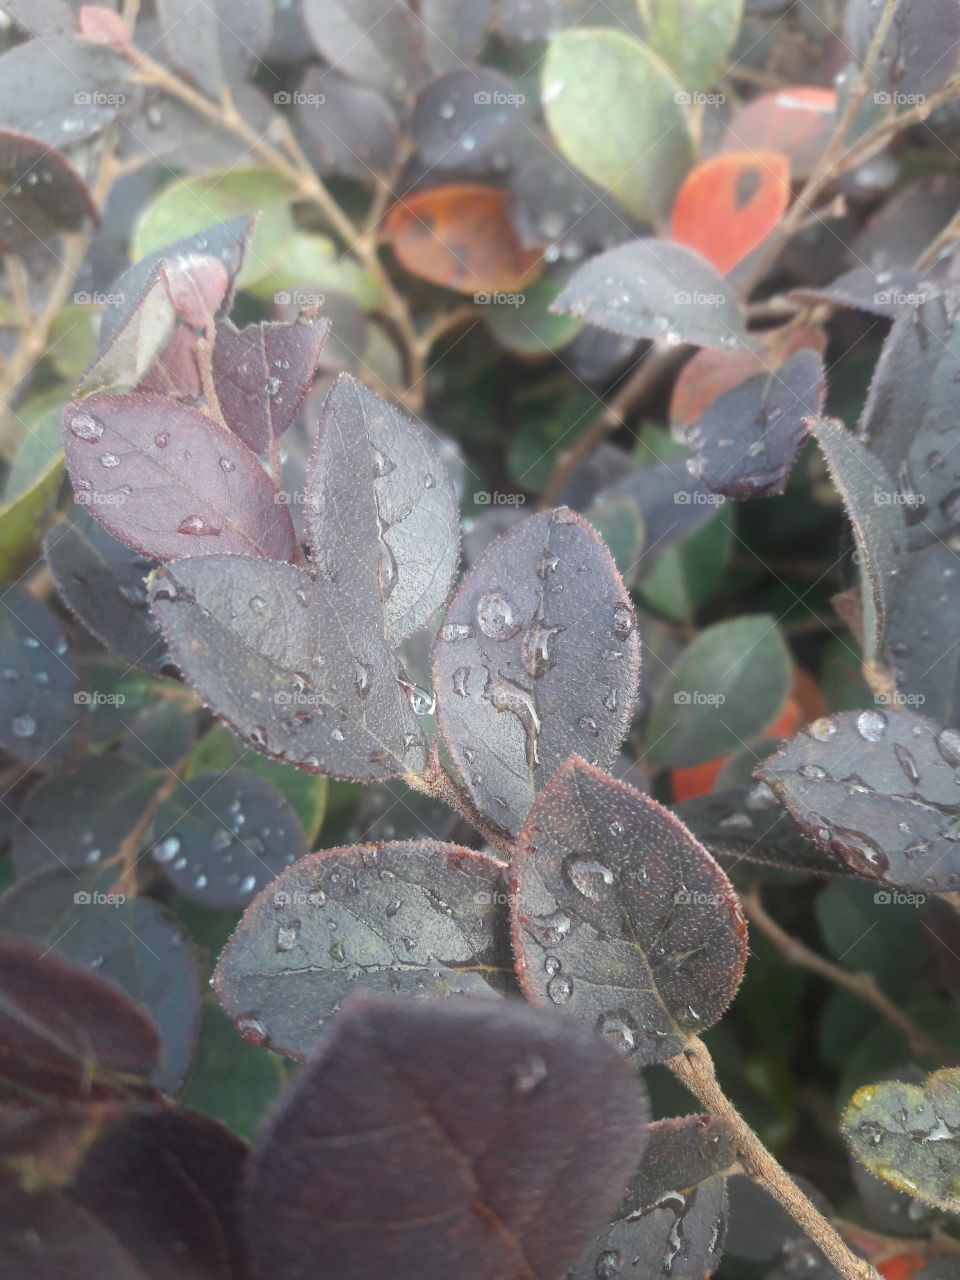 Leaves after some much needed rain.